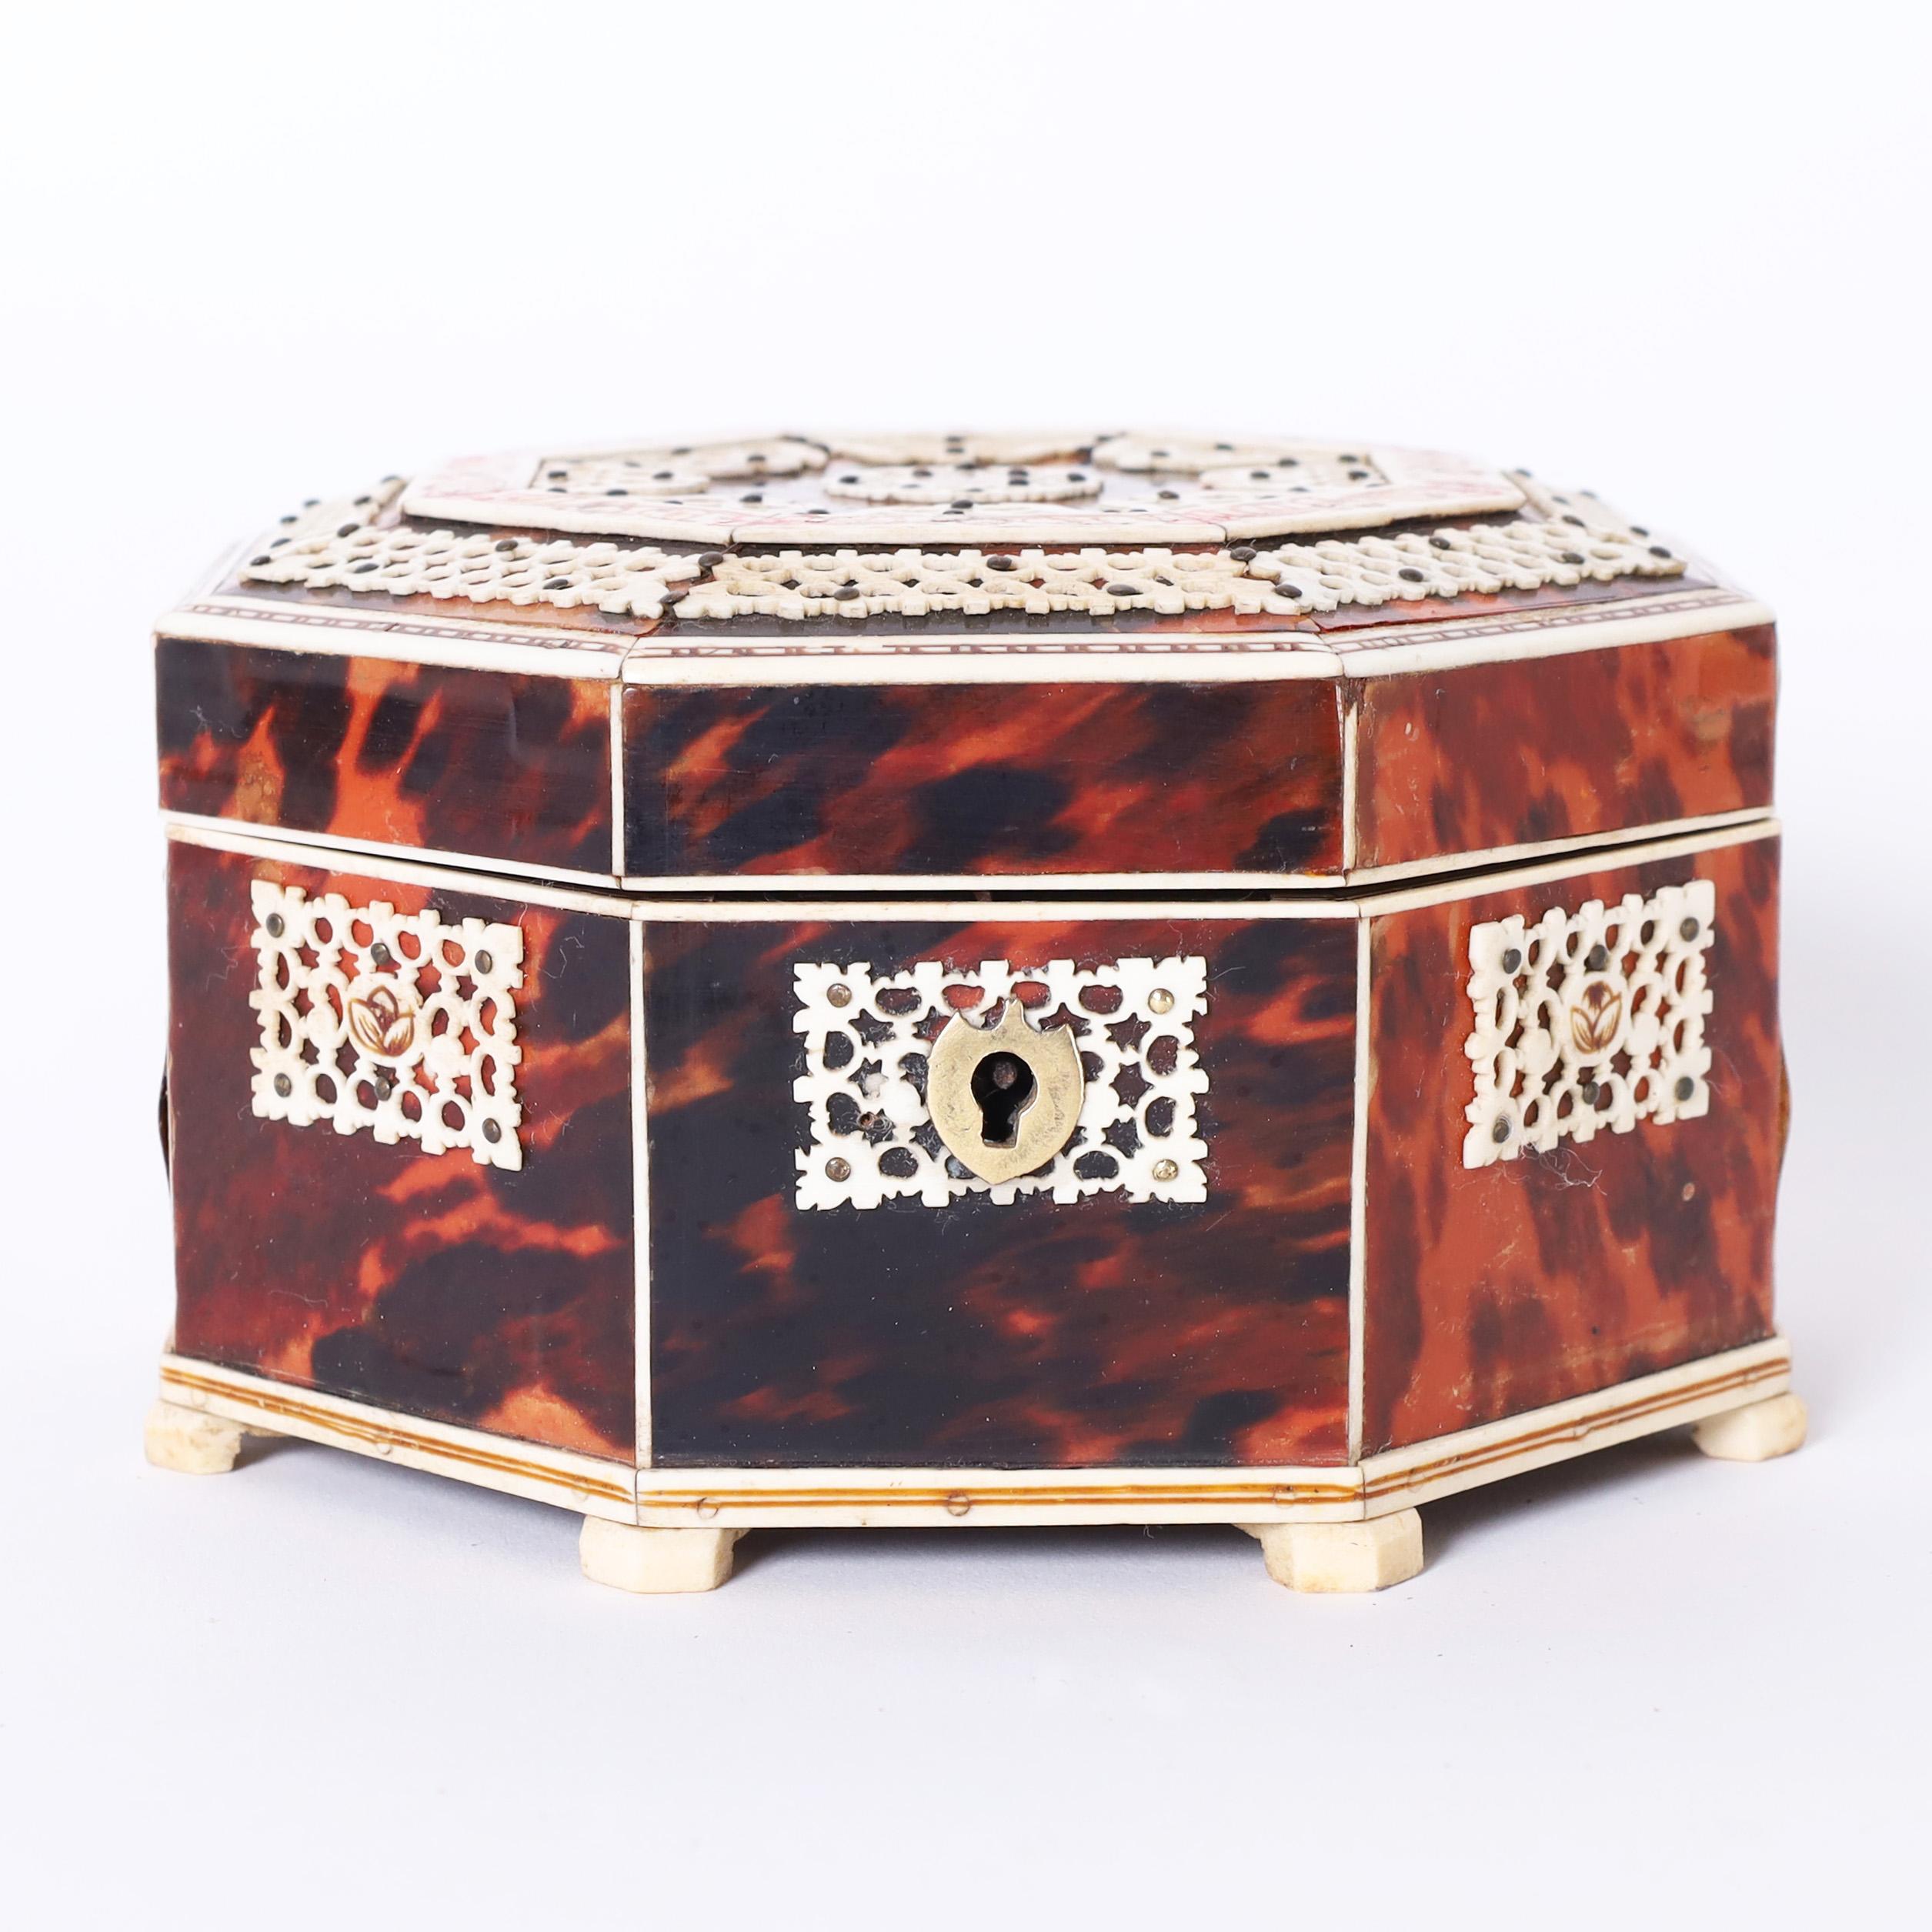 Impressive antique Anglo Indian box crafted in mahogany, clad in tortoise shell, and ambitiously decorated with bone. The inside has a mirror and red felt lining. 